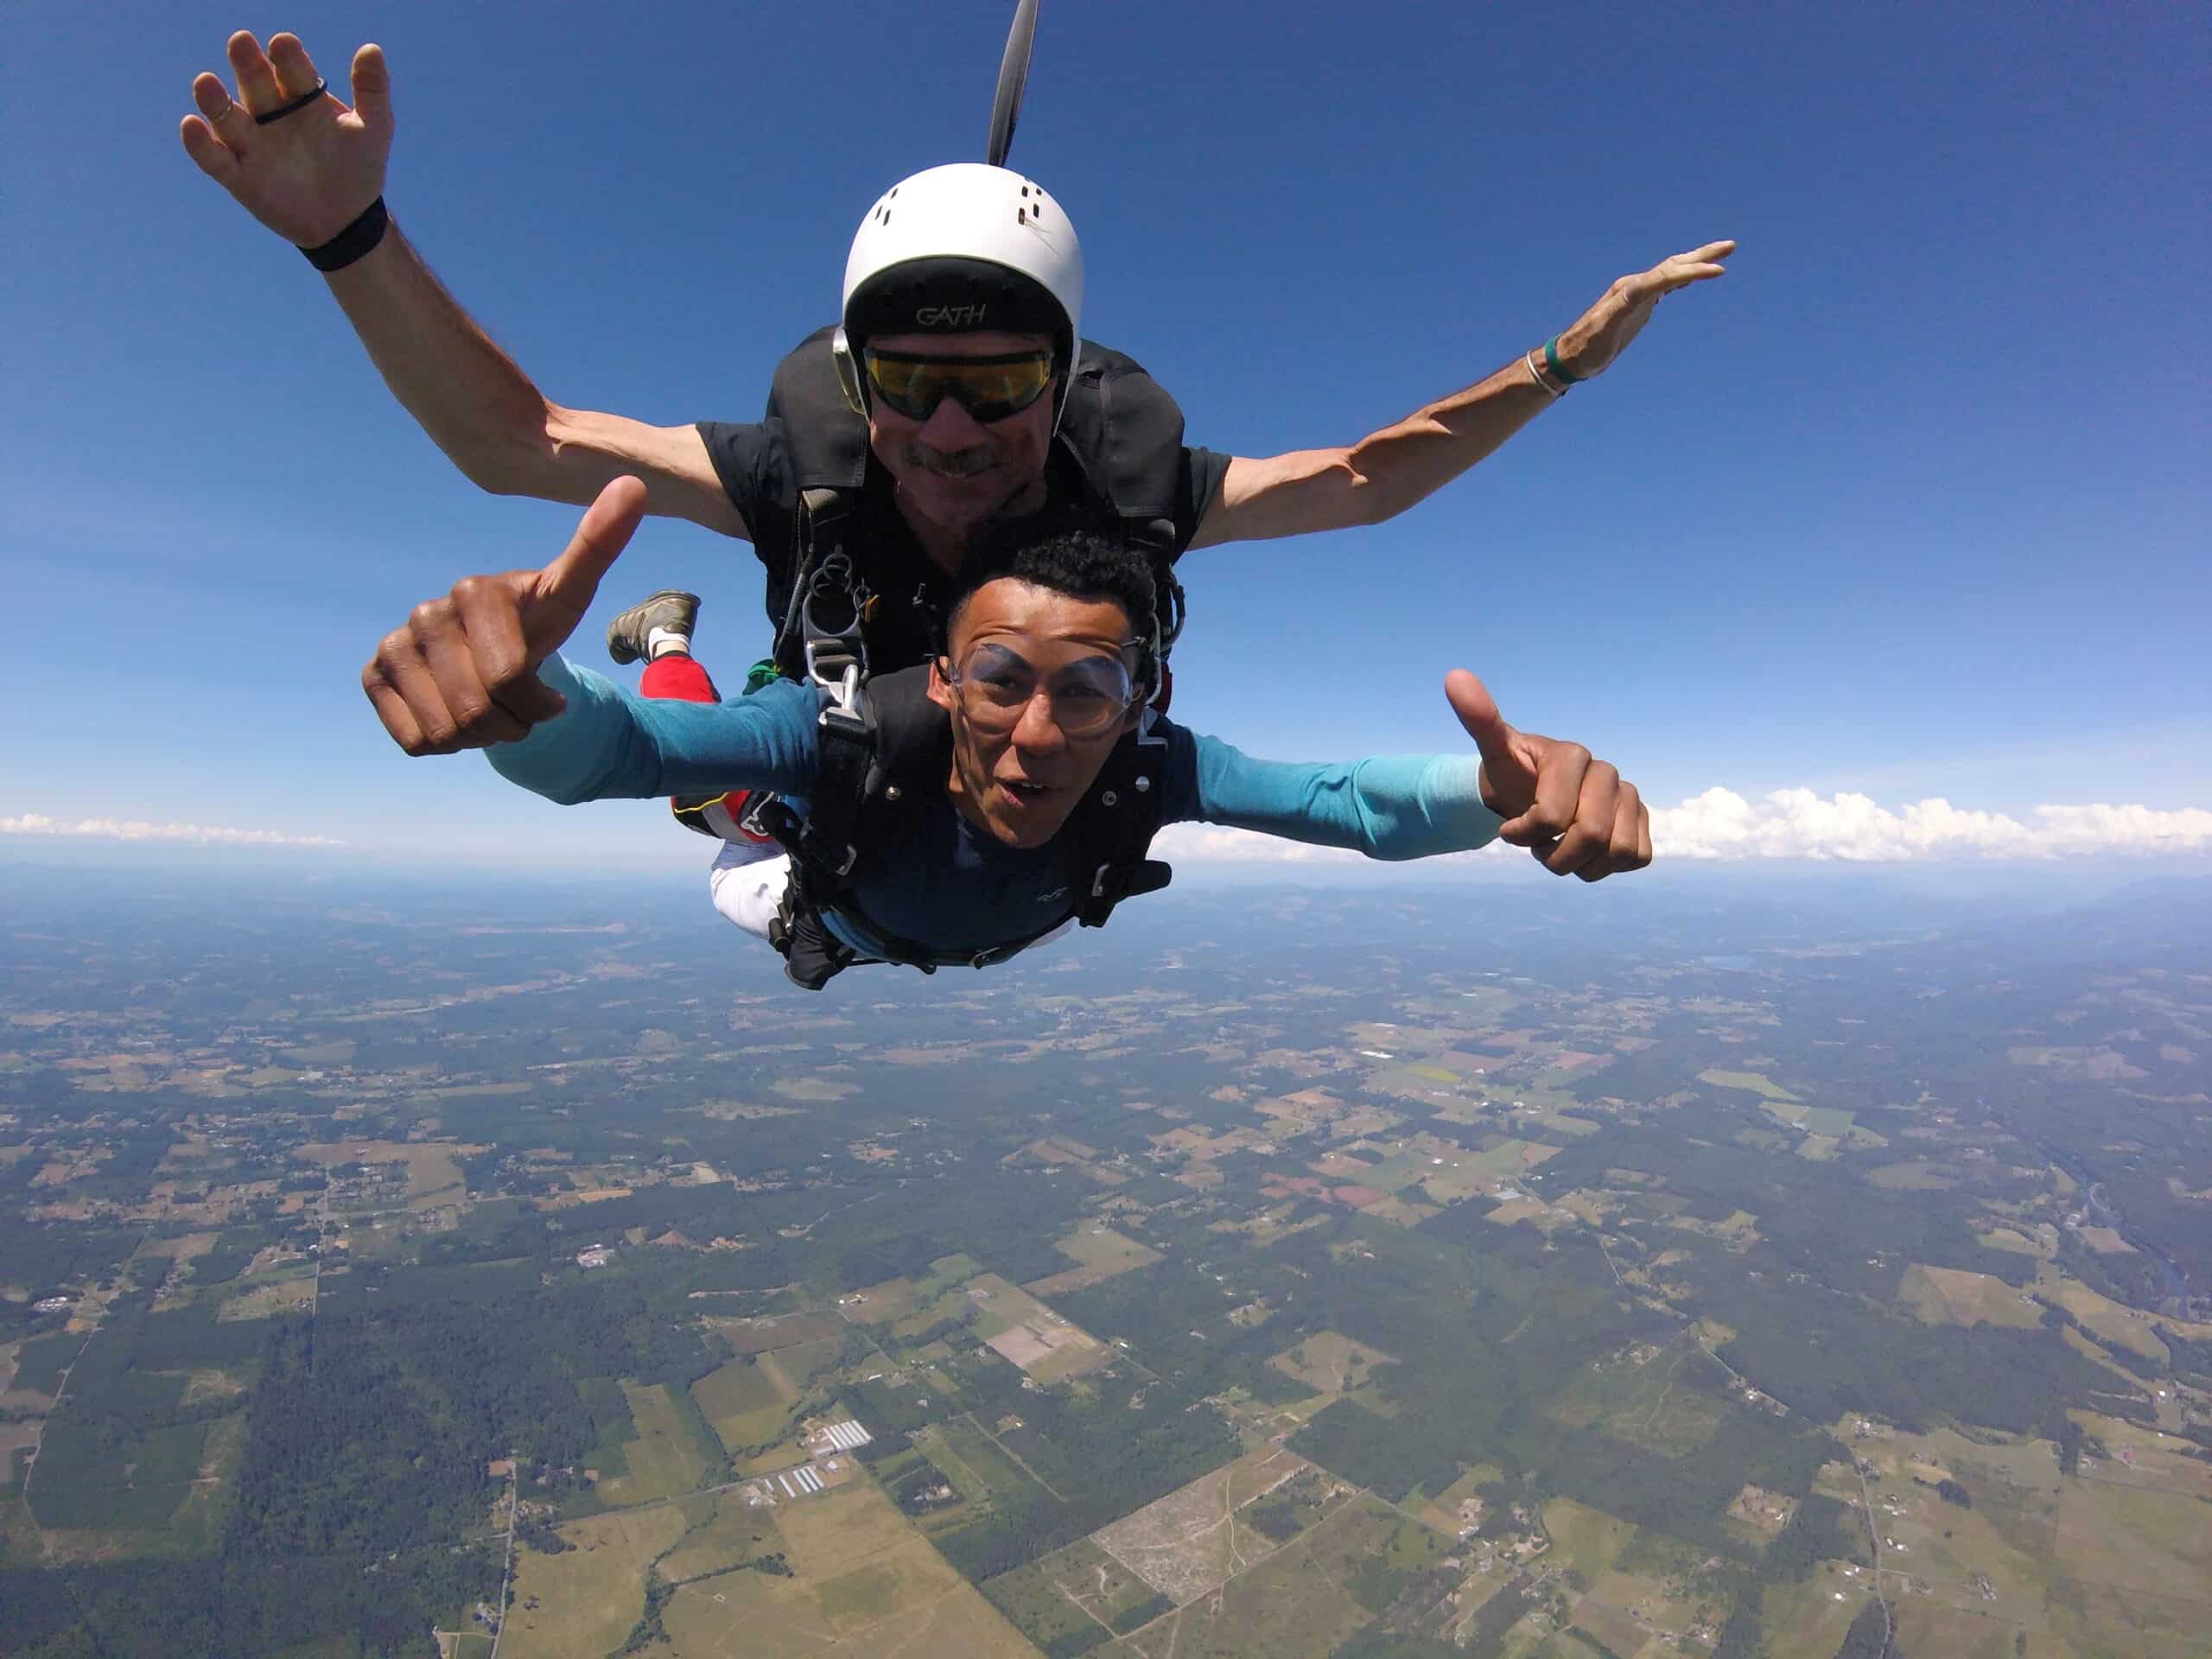 Two men are shown skydiving through the air with the earth thousands of feet below. Both are smiling at the camera and giving thumbs up.